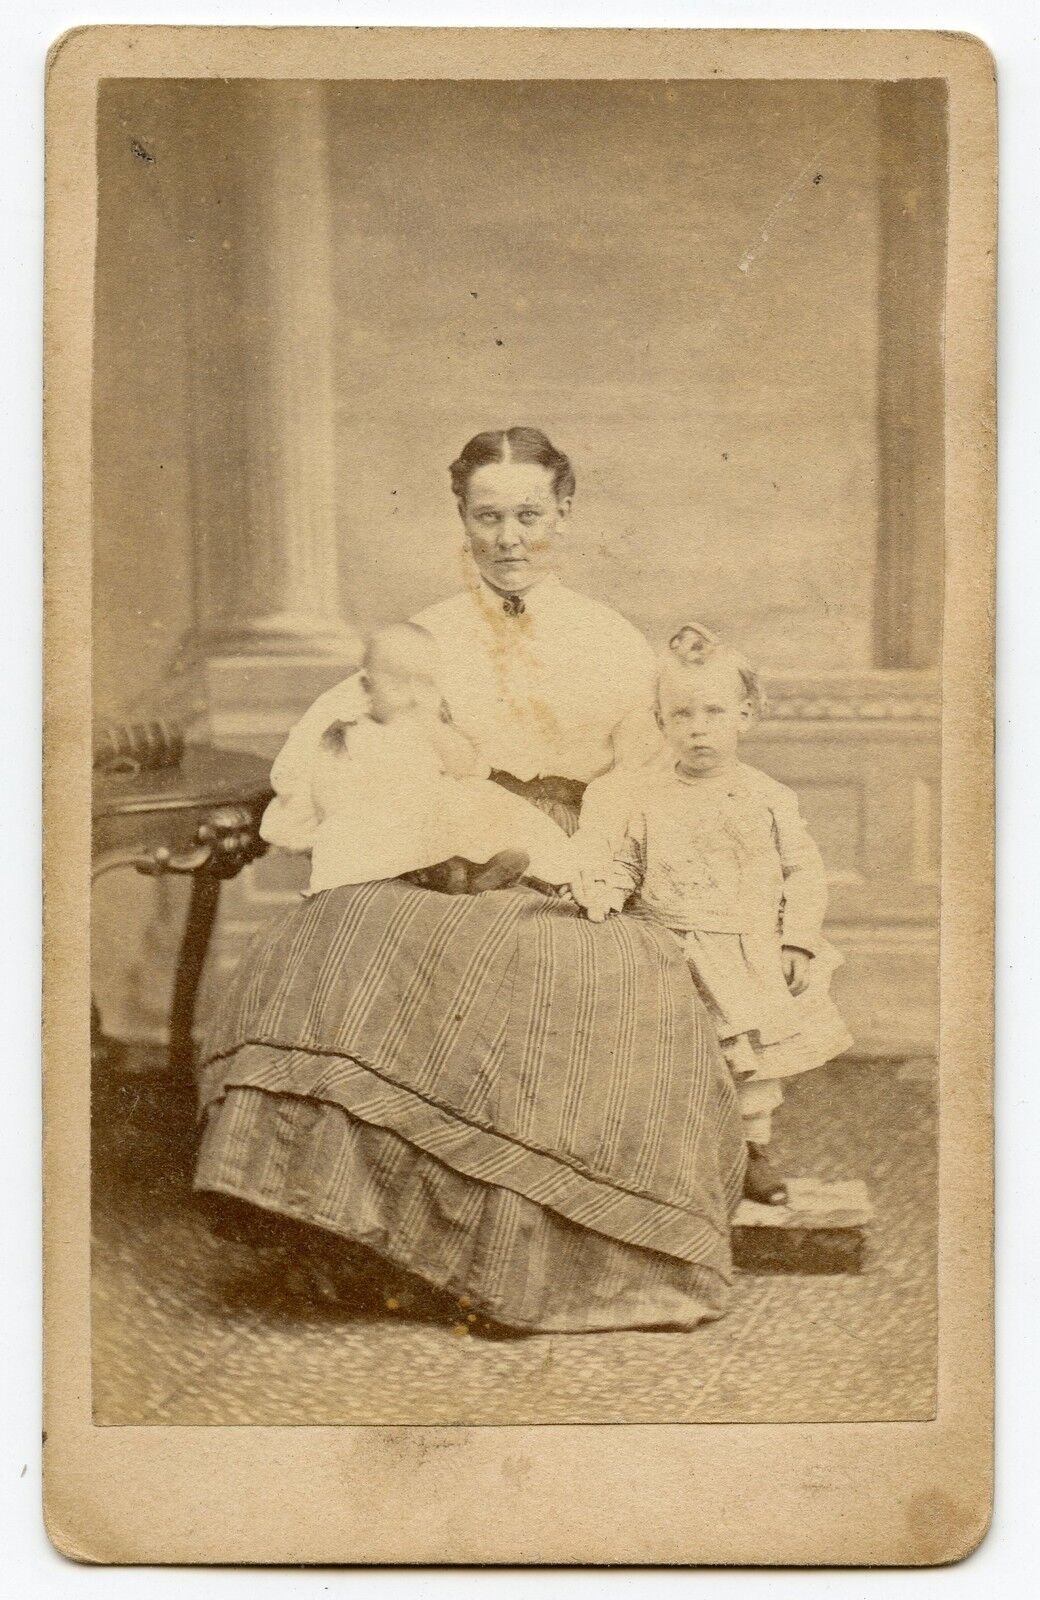 Woman with Kids CDV Photo by A. C. Mcintyre, Brockville C.W. Canada West